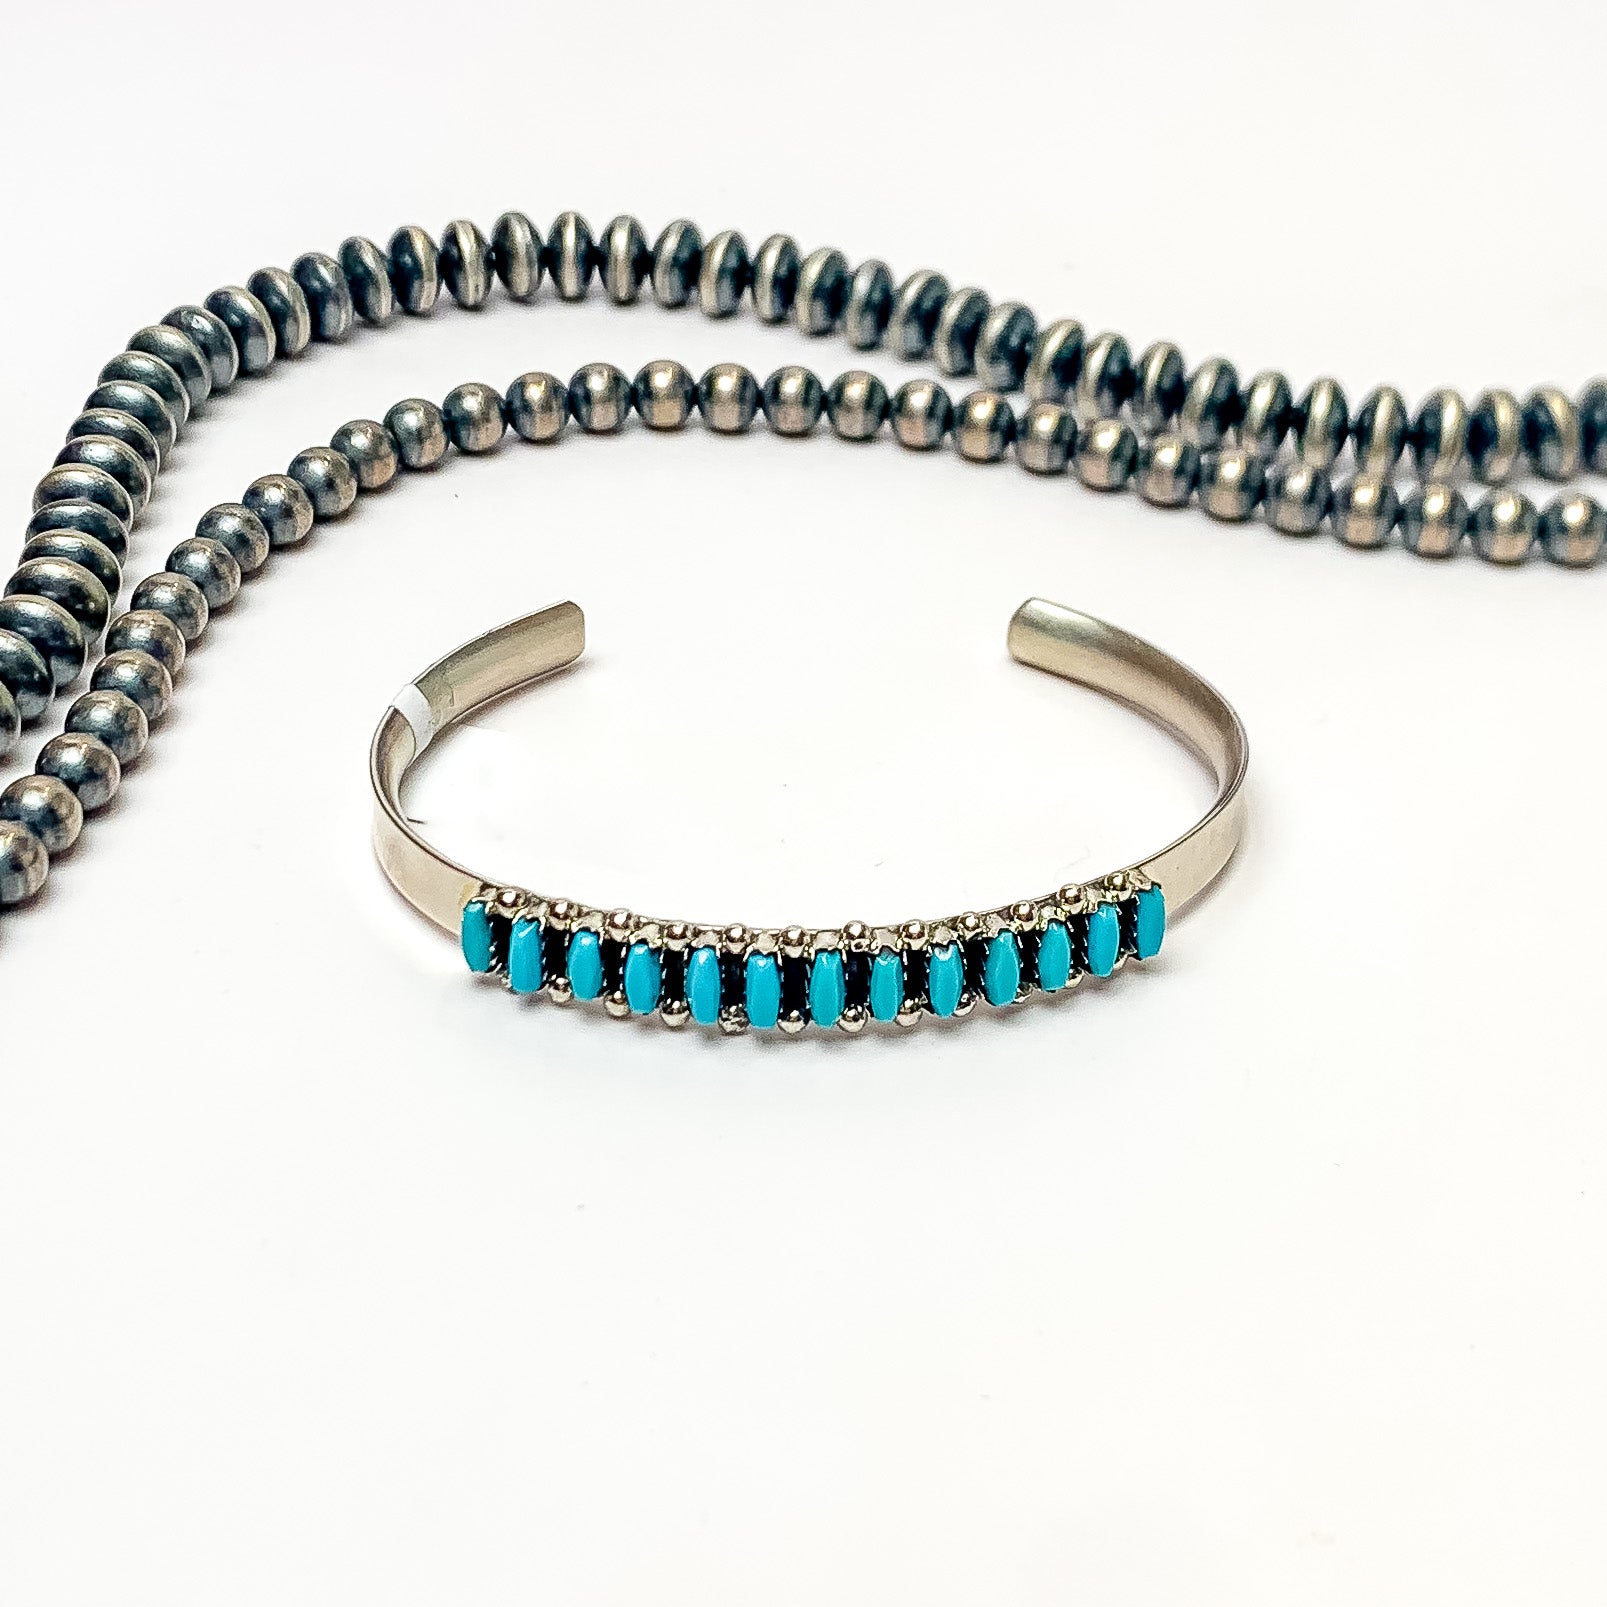 V Martz | Zuni Handmade Sterling Silver Cuff with Turquoise Stones